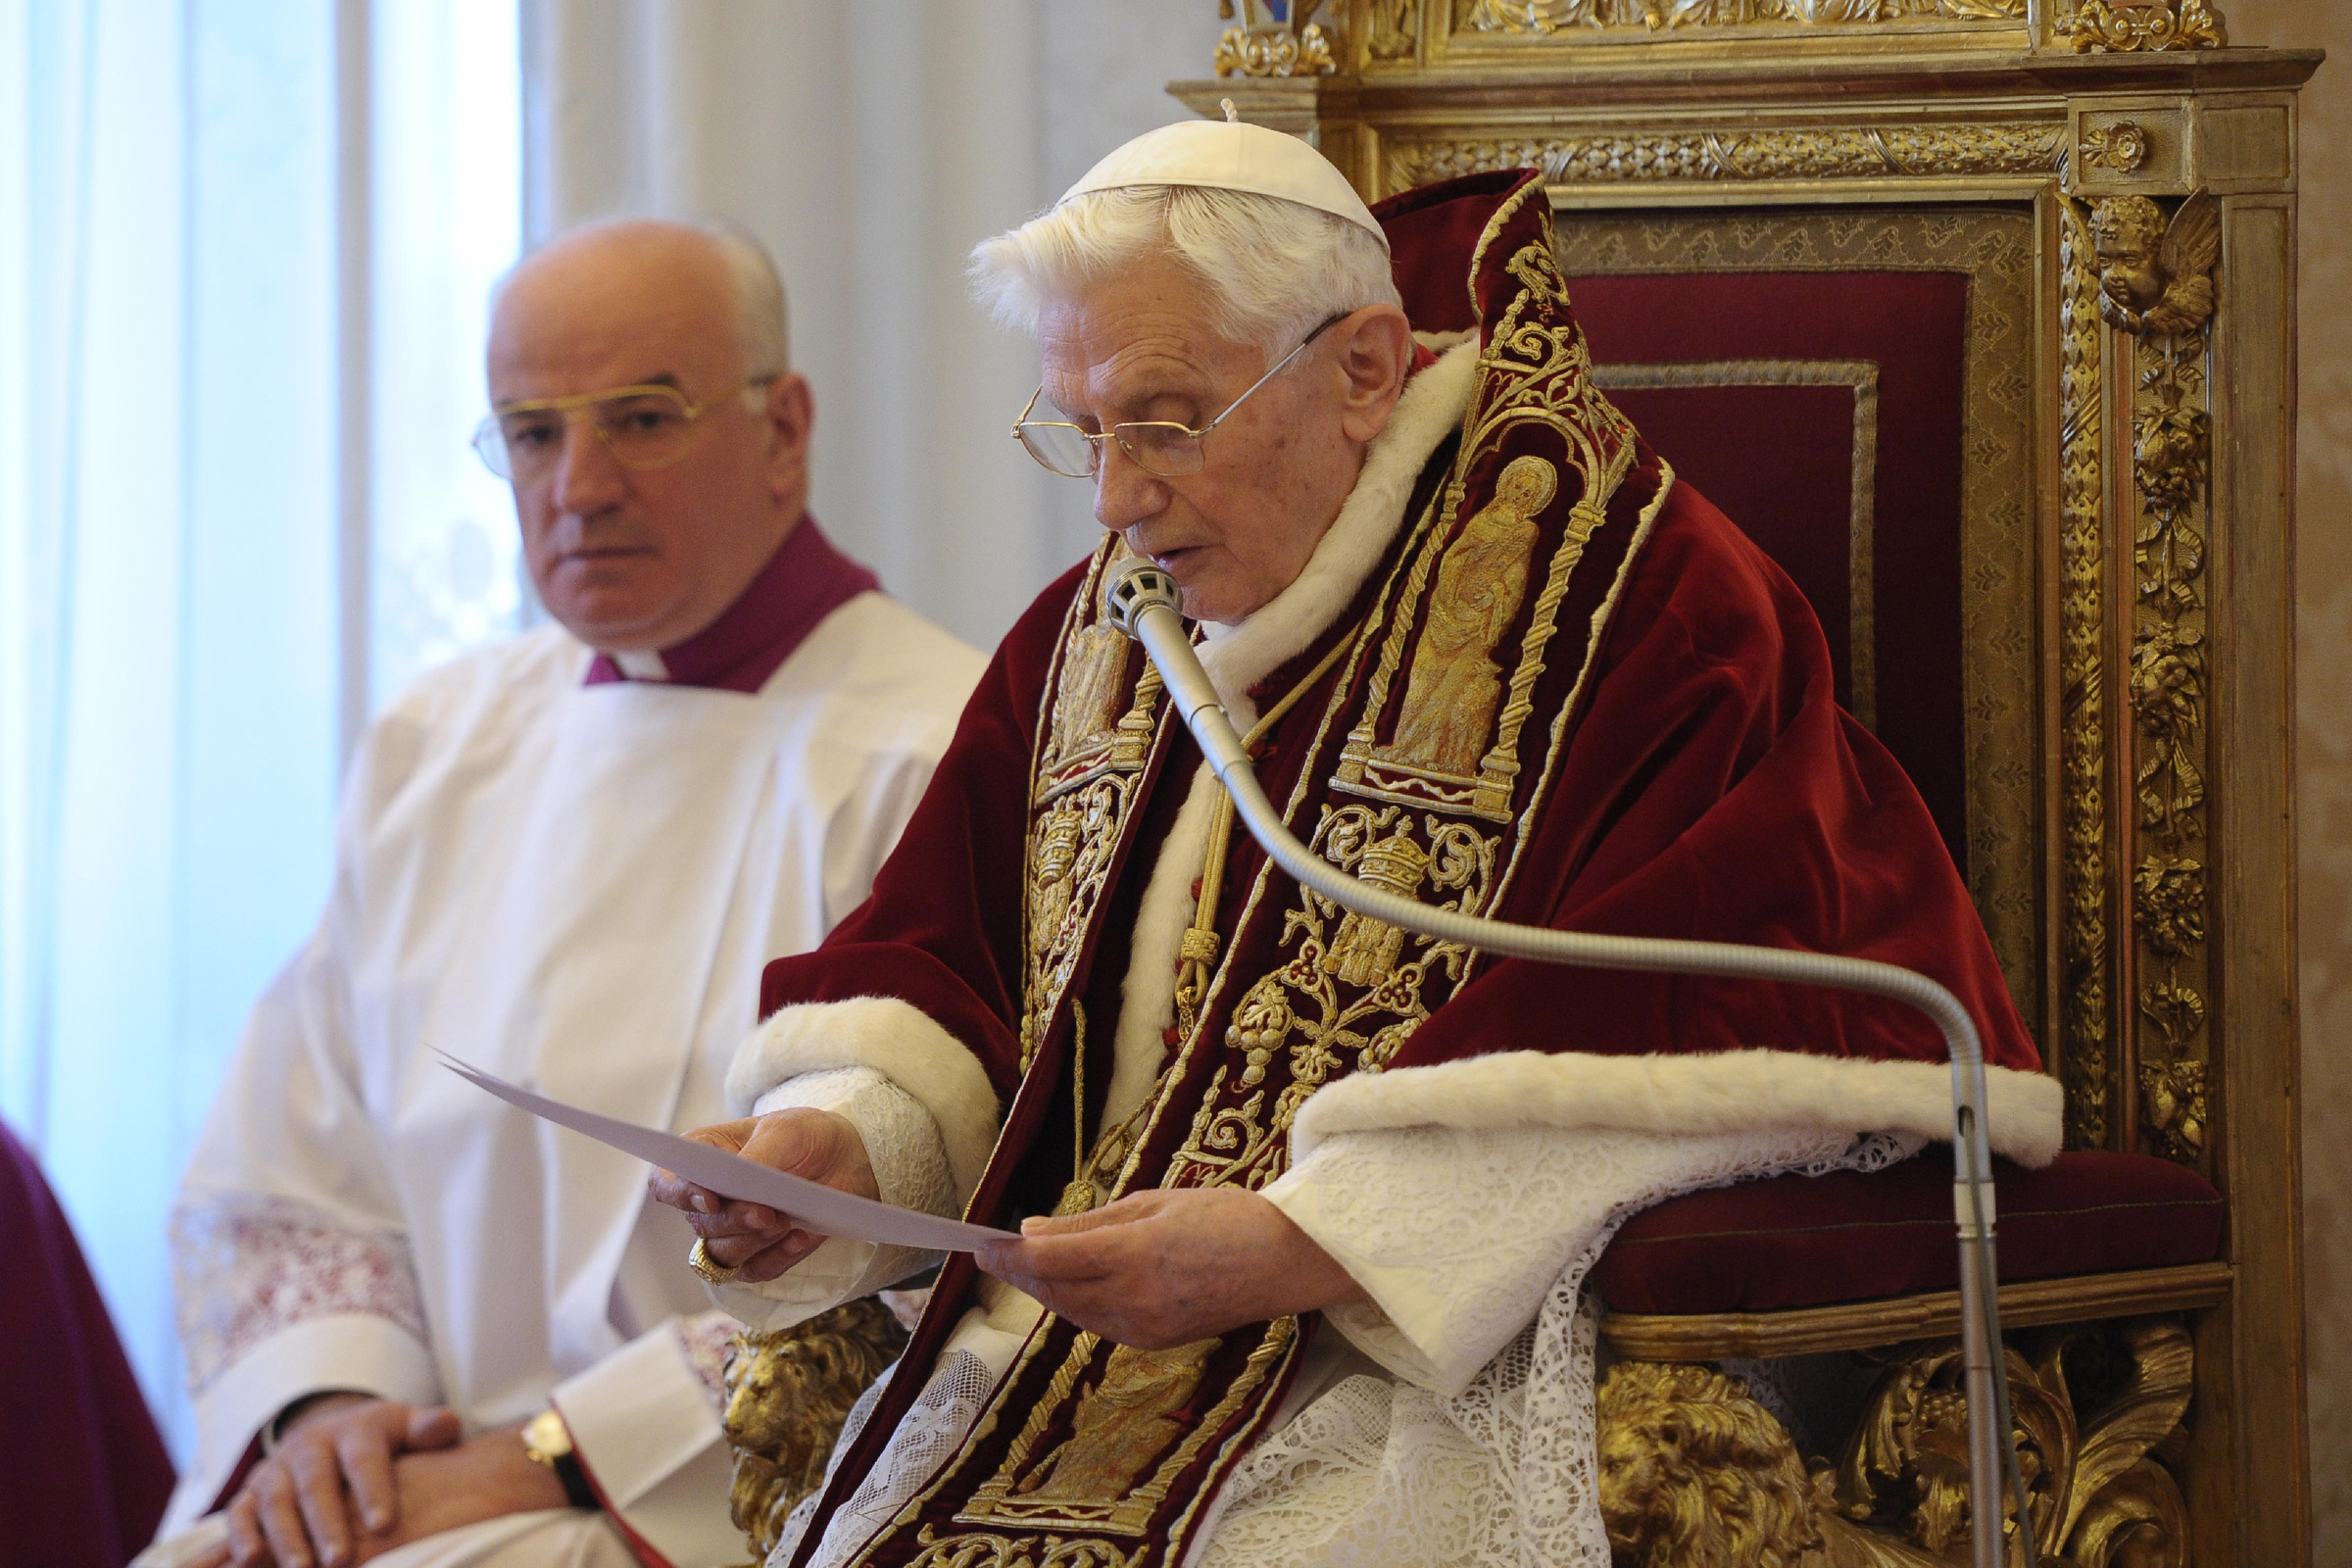 Benedict XVI Reads Resignation: Pope Benedict XVI reads his resignation in Latin during a meeting of cardinals at the Vatican in this Feb. 11, 2013, file photo. There were no media members in attendance. (CNS photo/L'Osservatore Romano) (Feb. 13, 2014)